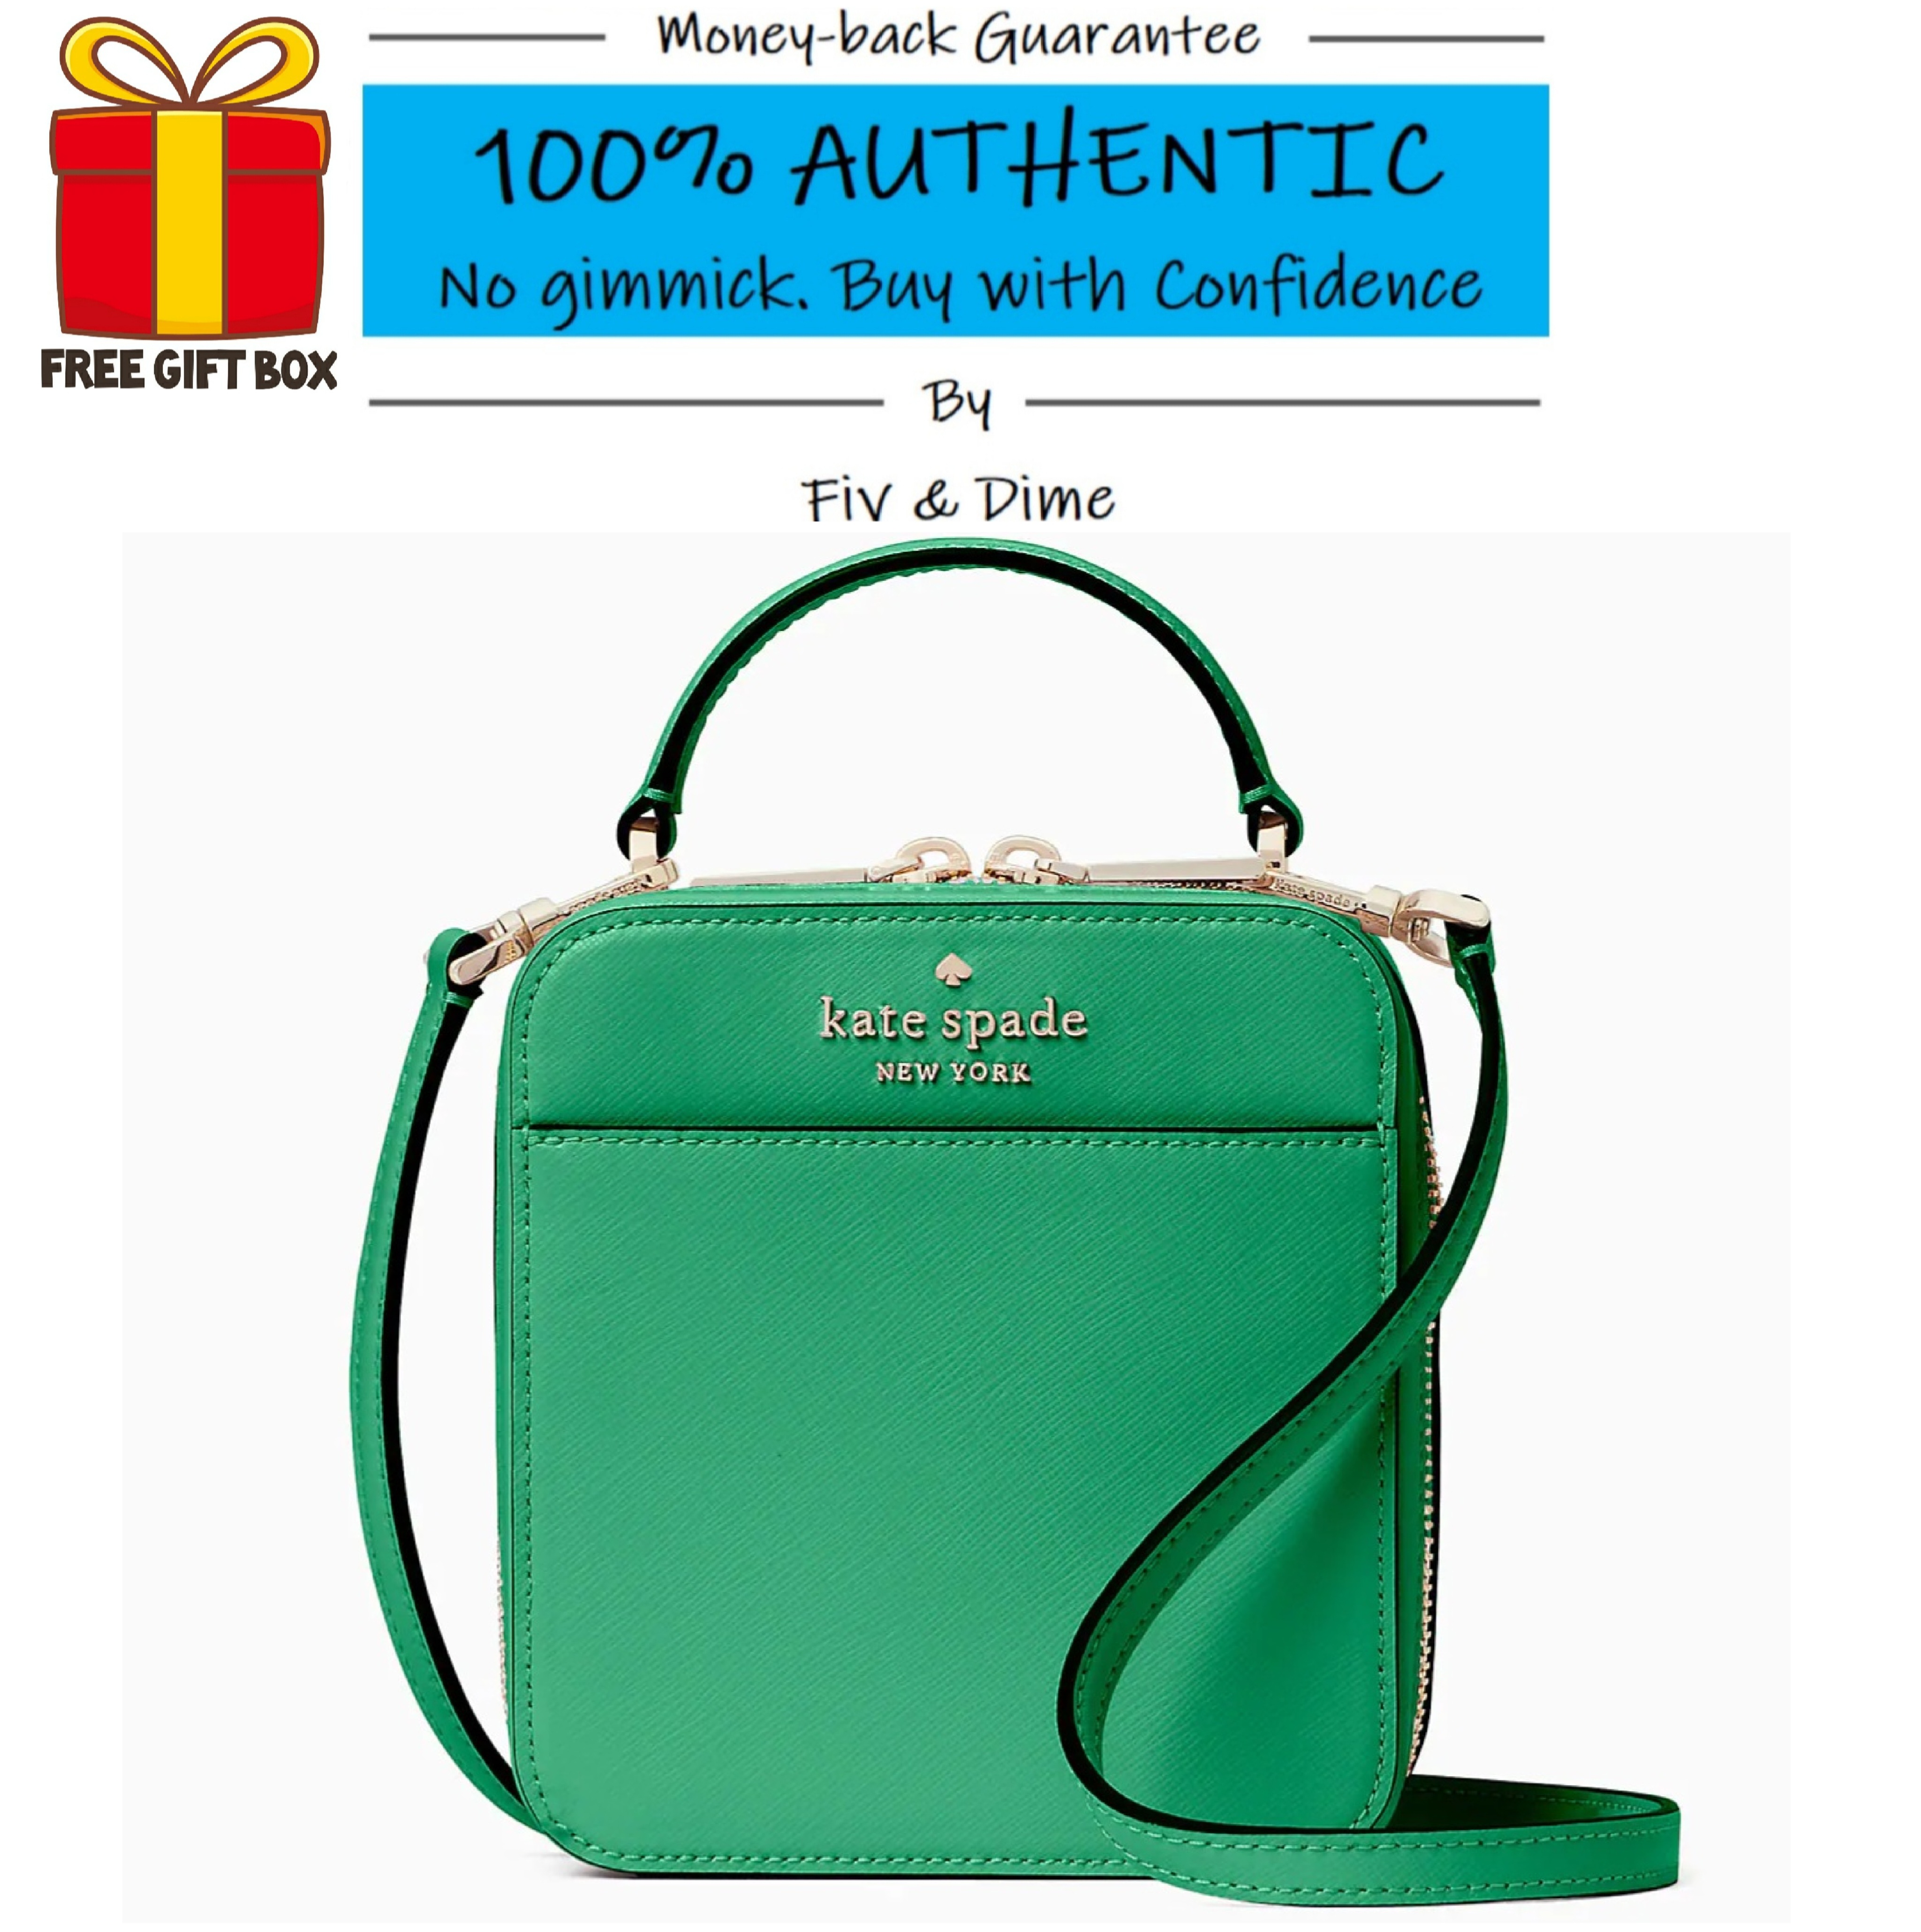 24-Hour Flash Deal: Get This $250 Kate Spade Bag for Just $59 - E! Online